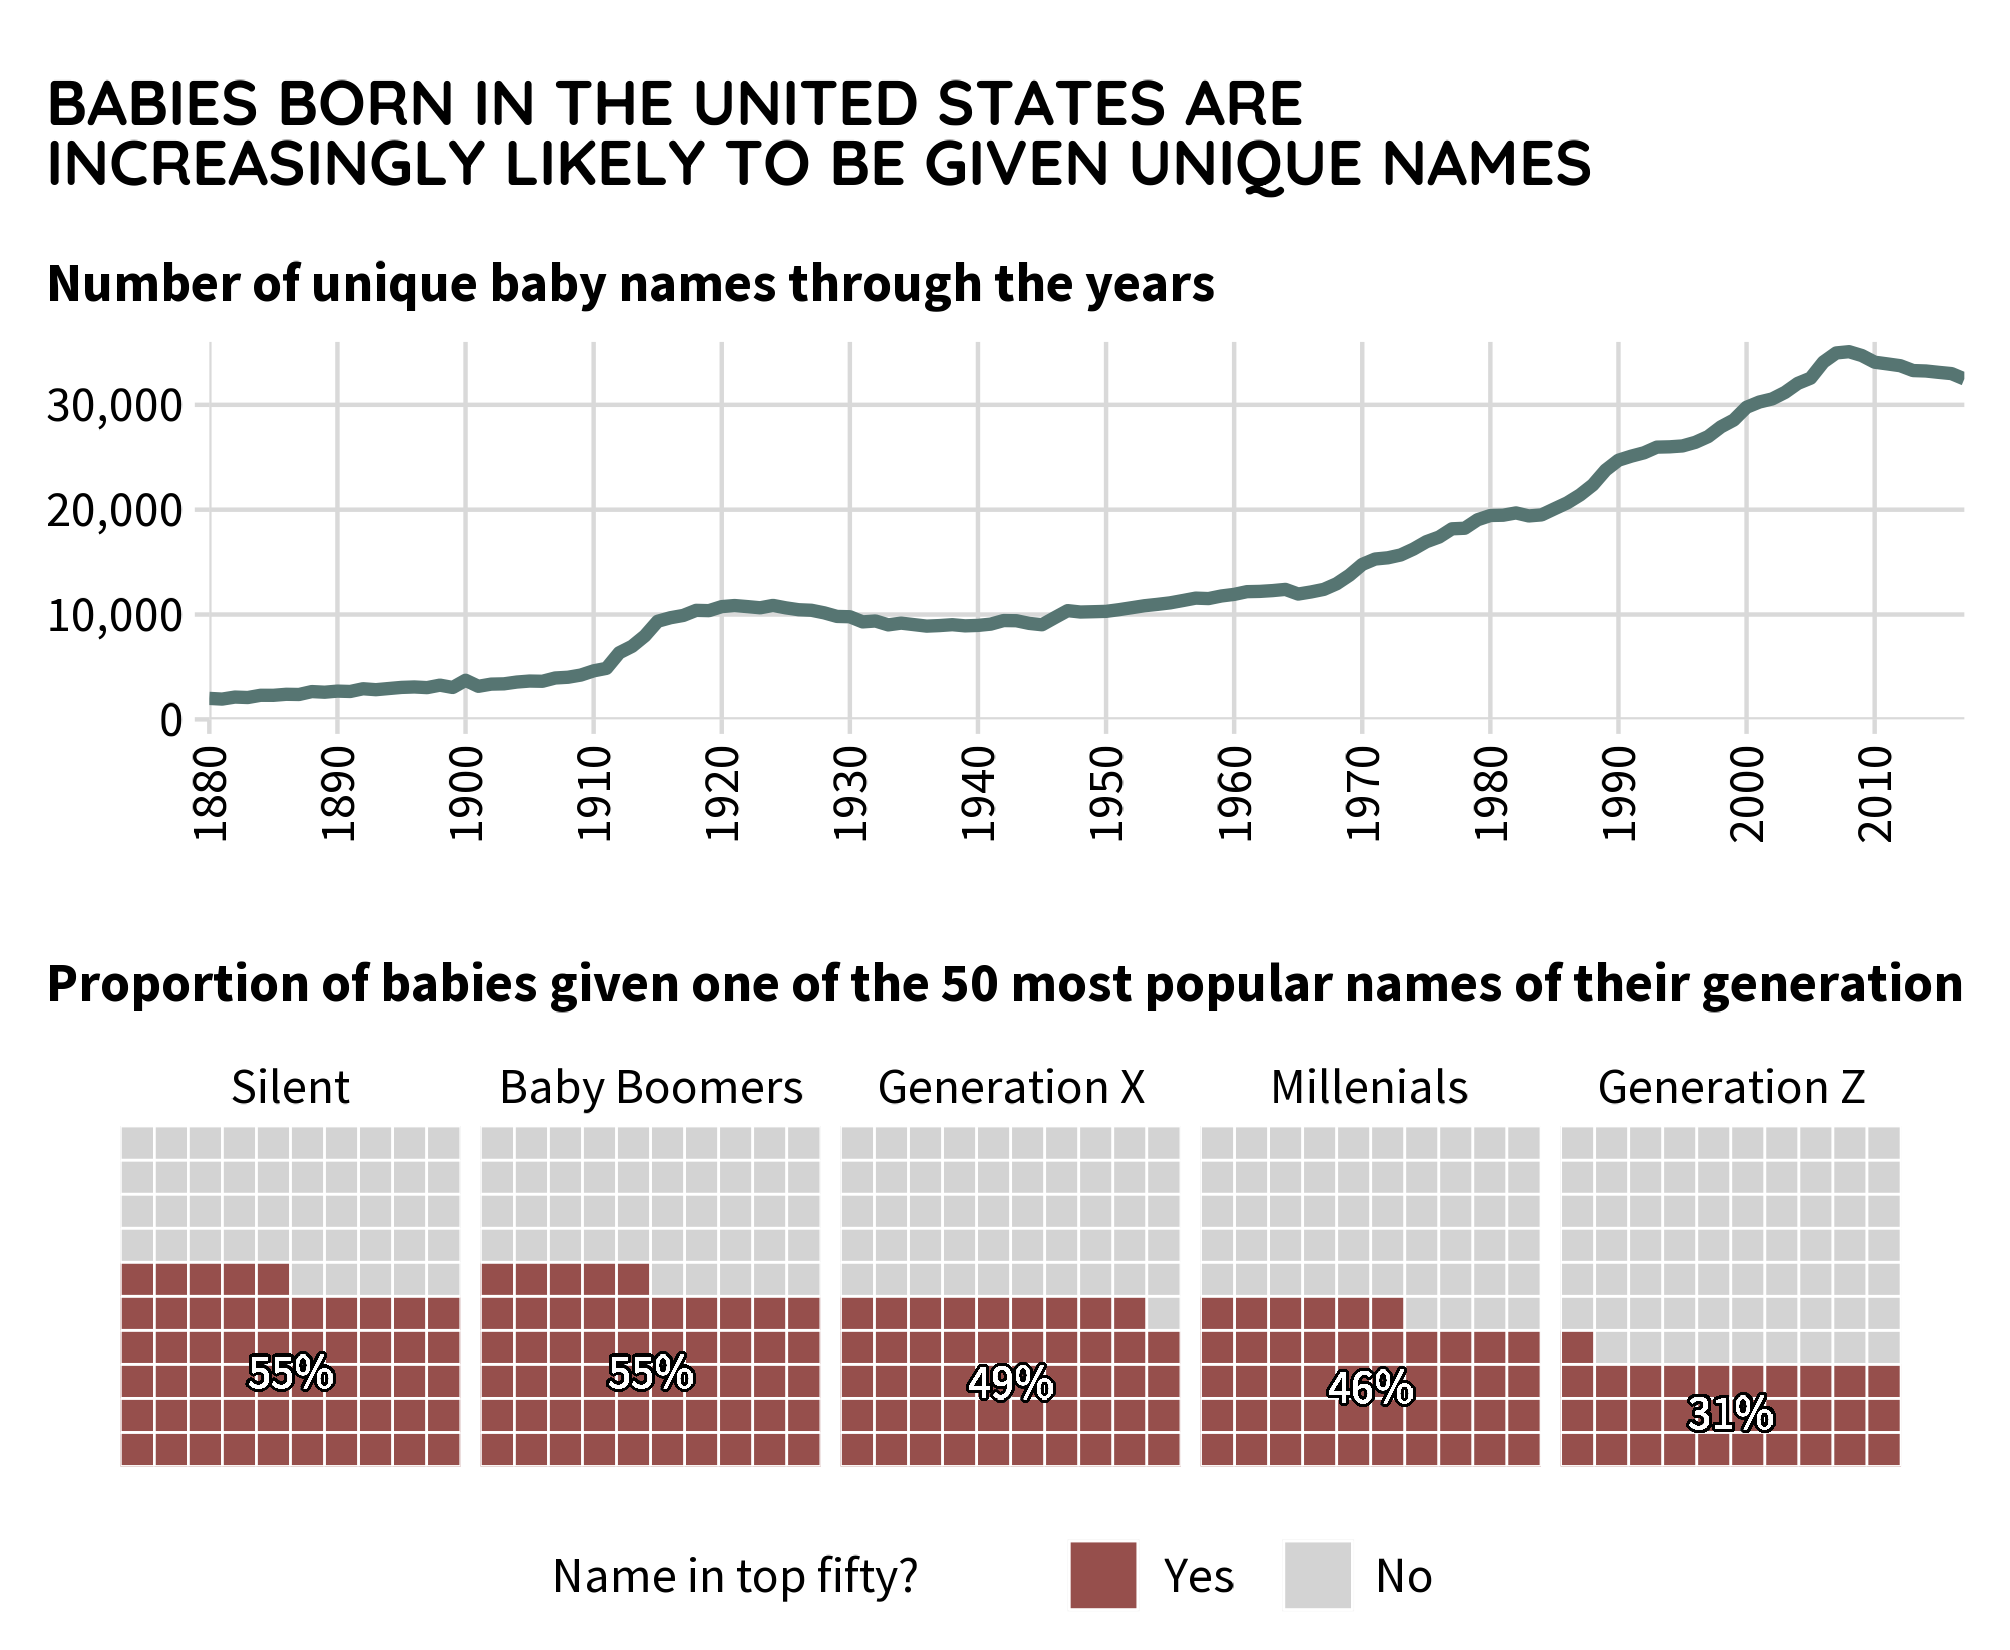 Line graph showing an increase in the number of unique baby names from 1880 to 2017. Five waffle charts for each of five generations (silent, baby boomers, generation X, millenials, and generation Z) showing the proportion of babies given one of the top 50 names of their generation. The proportion has decreased from 55% for the Silent generation to 31% for Generation Z.